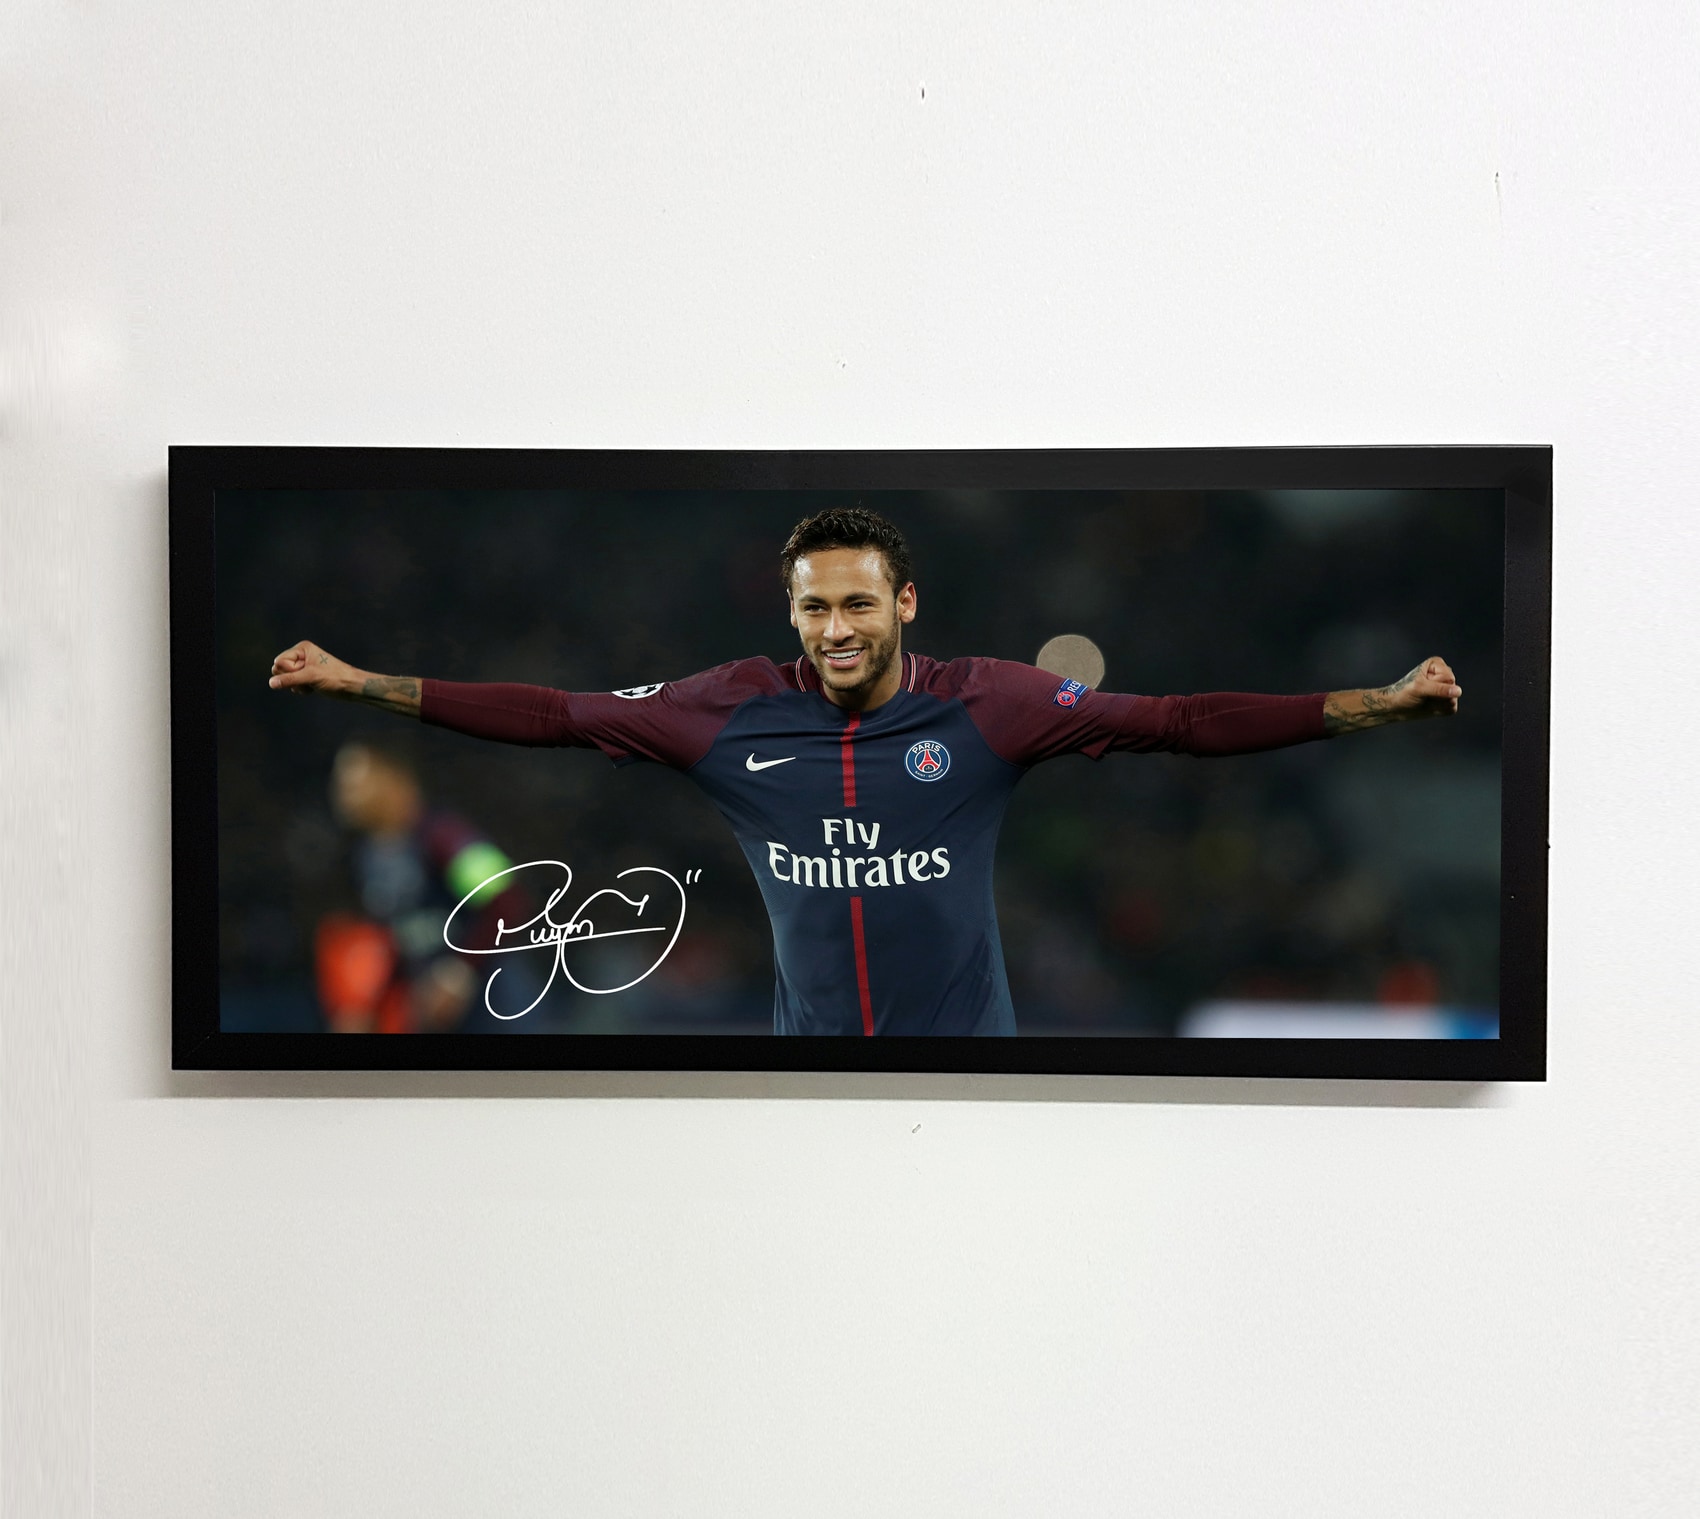 Buy Boomah Accessories Neymar Psg Autographed Poster With Frame Online Shop Home And Garden On Carrefour Uae